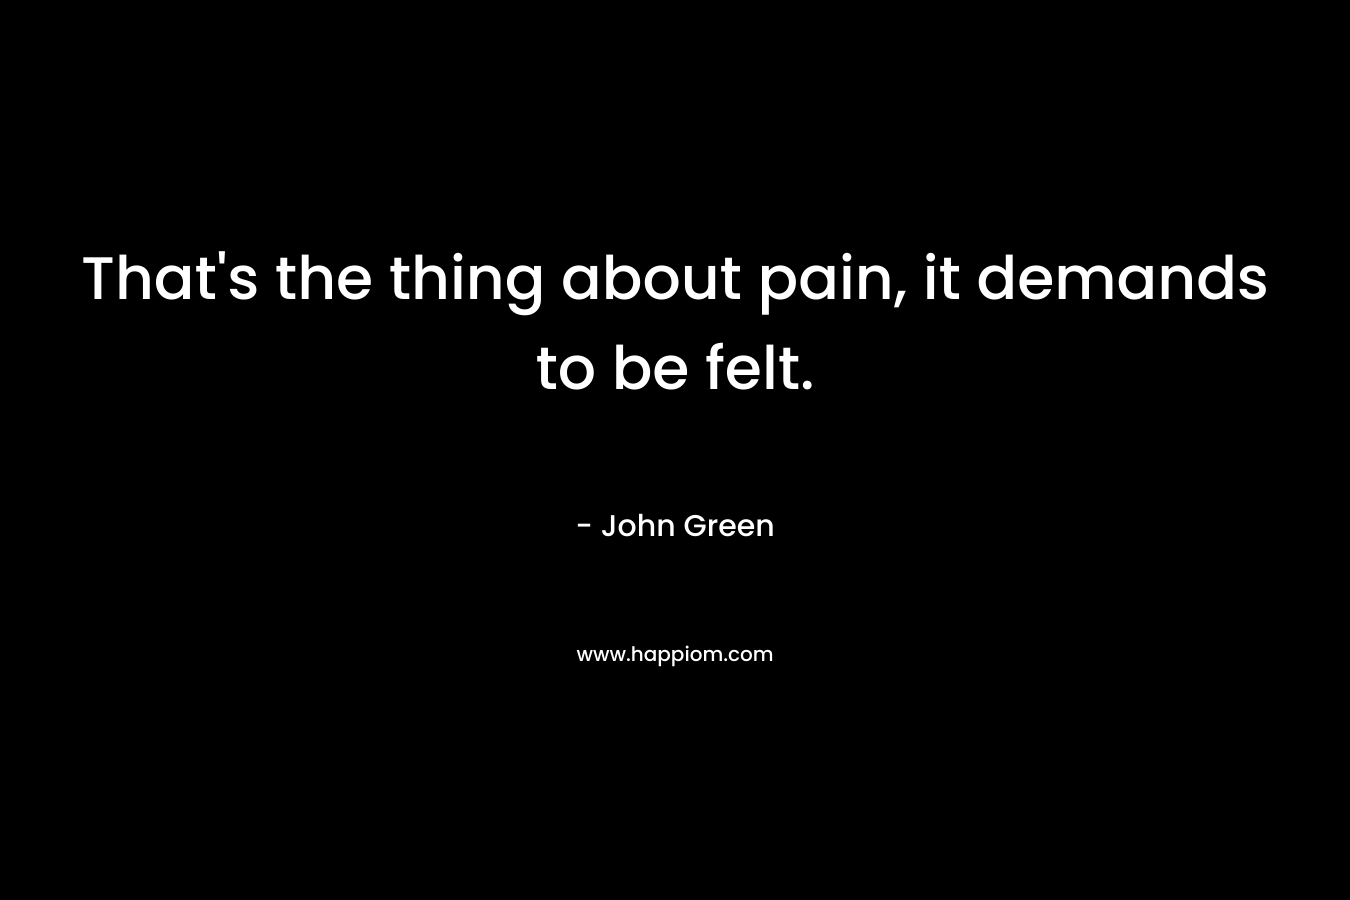 That’s the thing about pain, it demands to be felt. – John Green